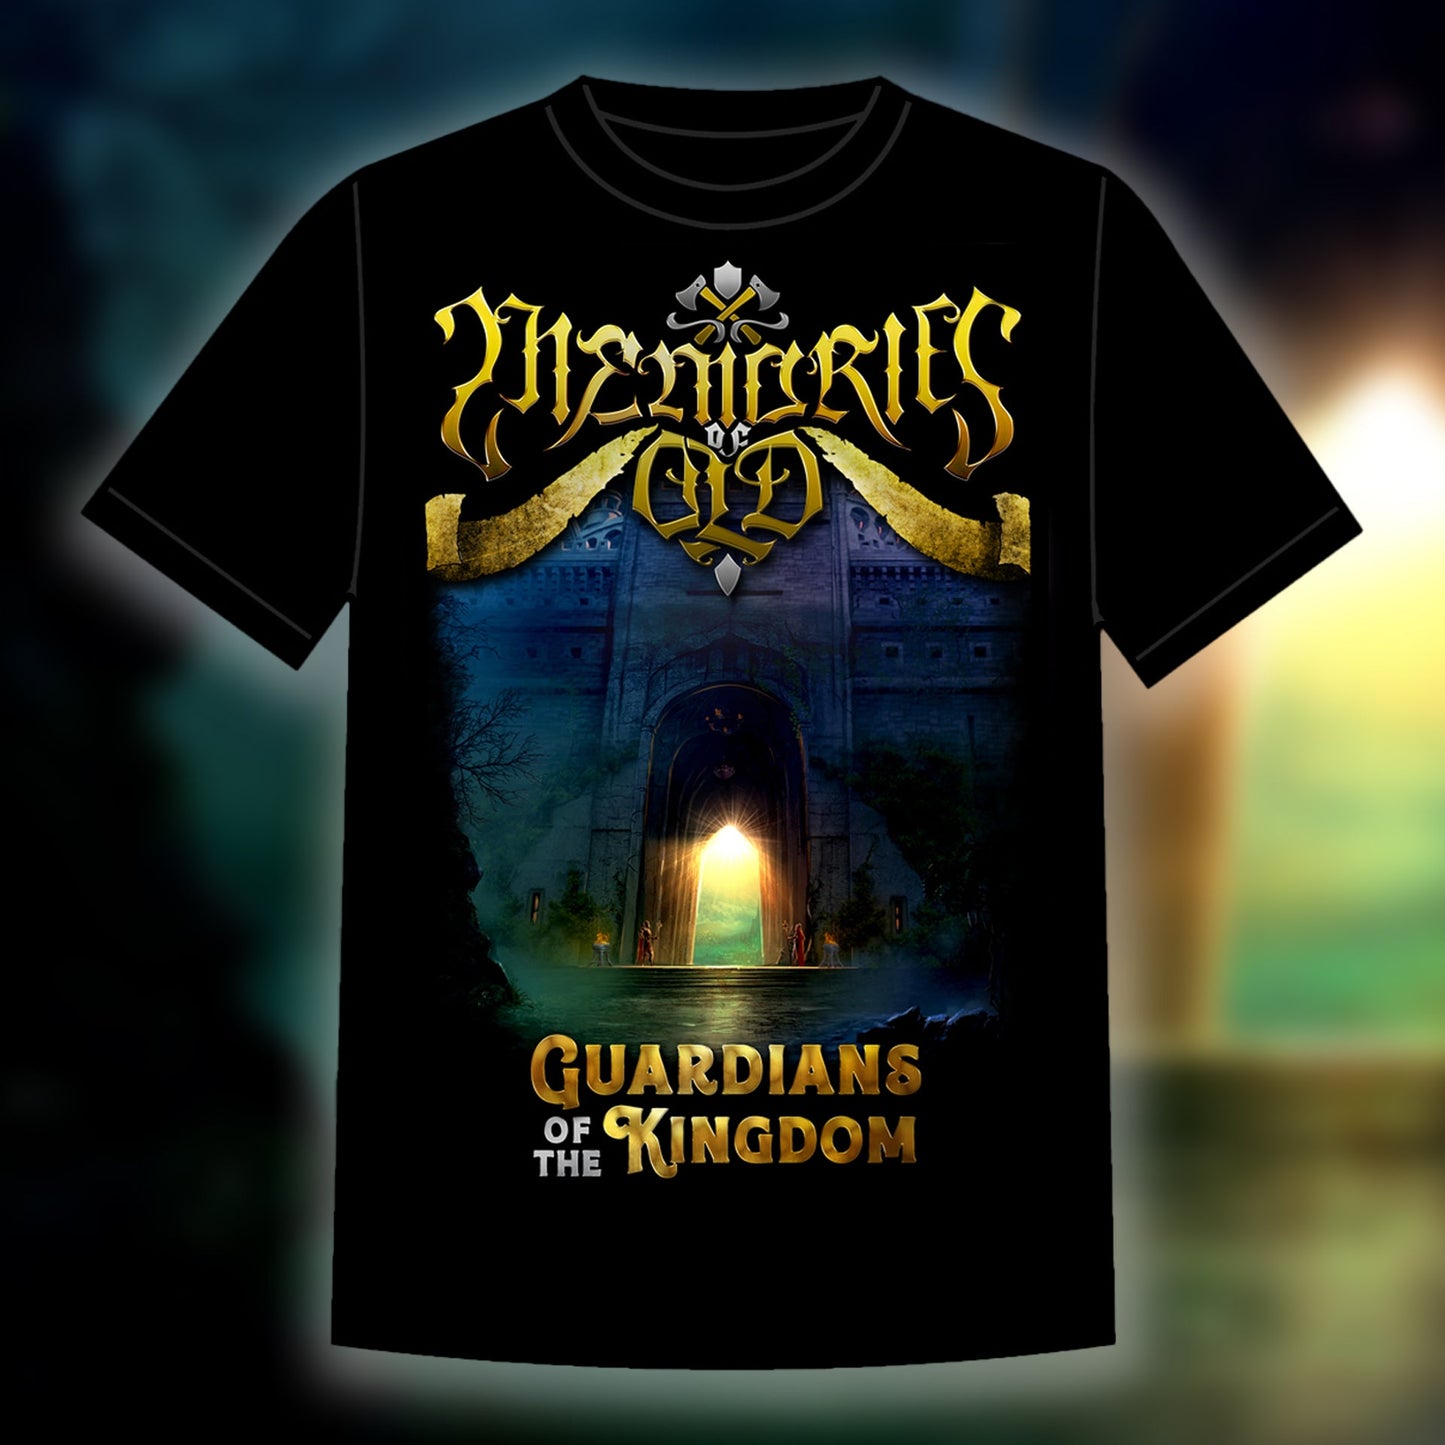 MEMORIES OF OLD - Guardians of the Kingdom T-Shirt size L